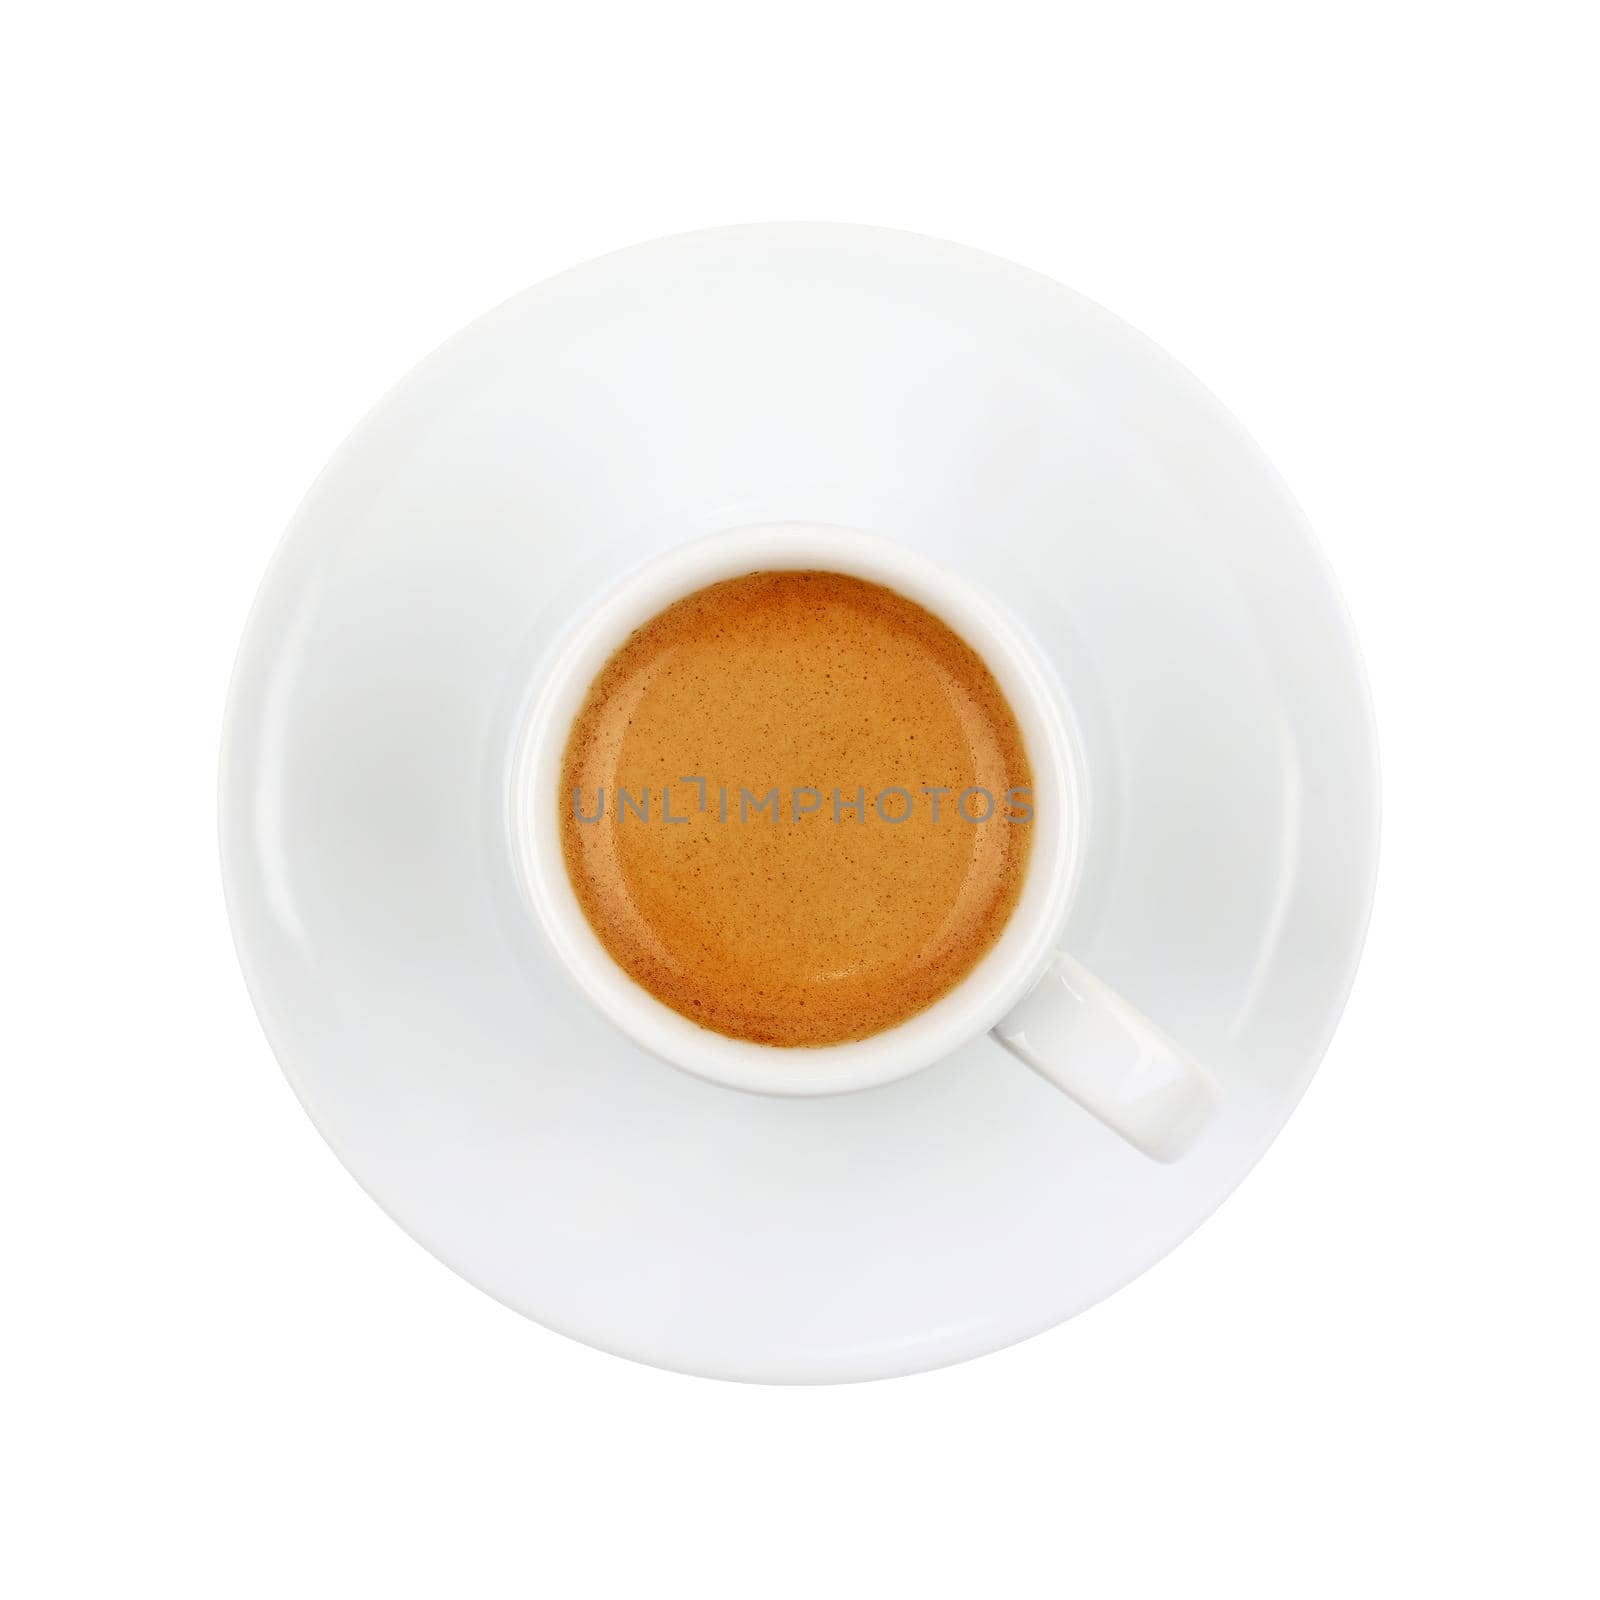 White cup full of espresso coffee with brown crema, on saucer, isolated on white background, elevated top view, directly above